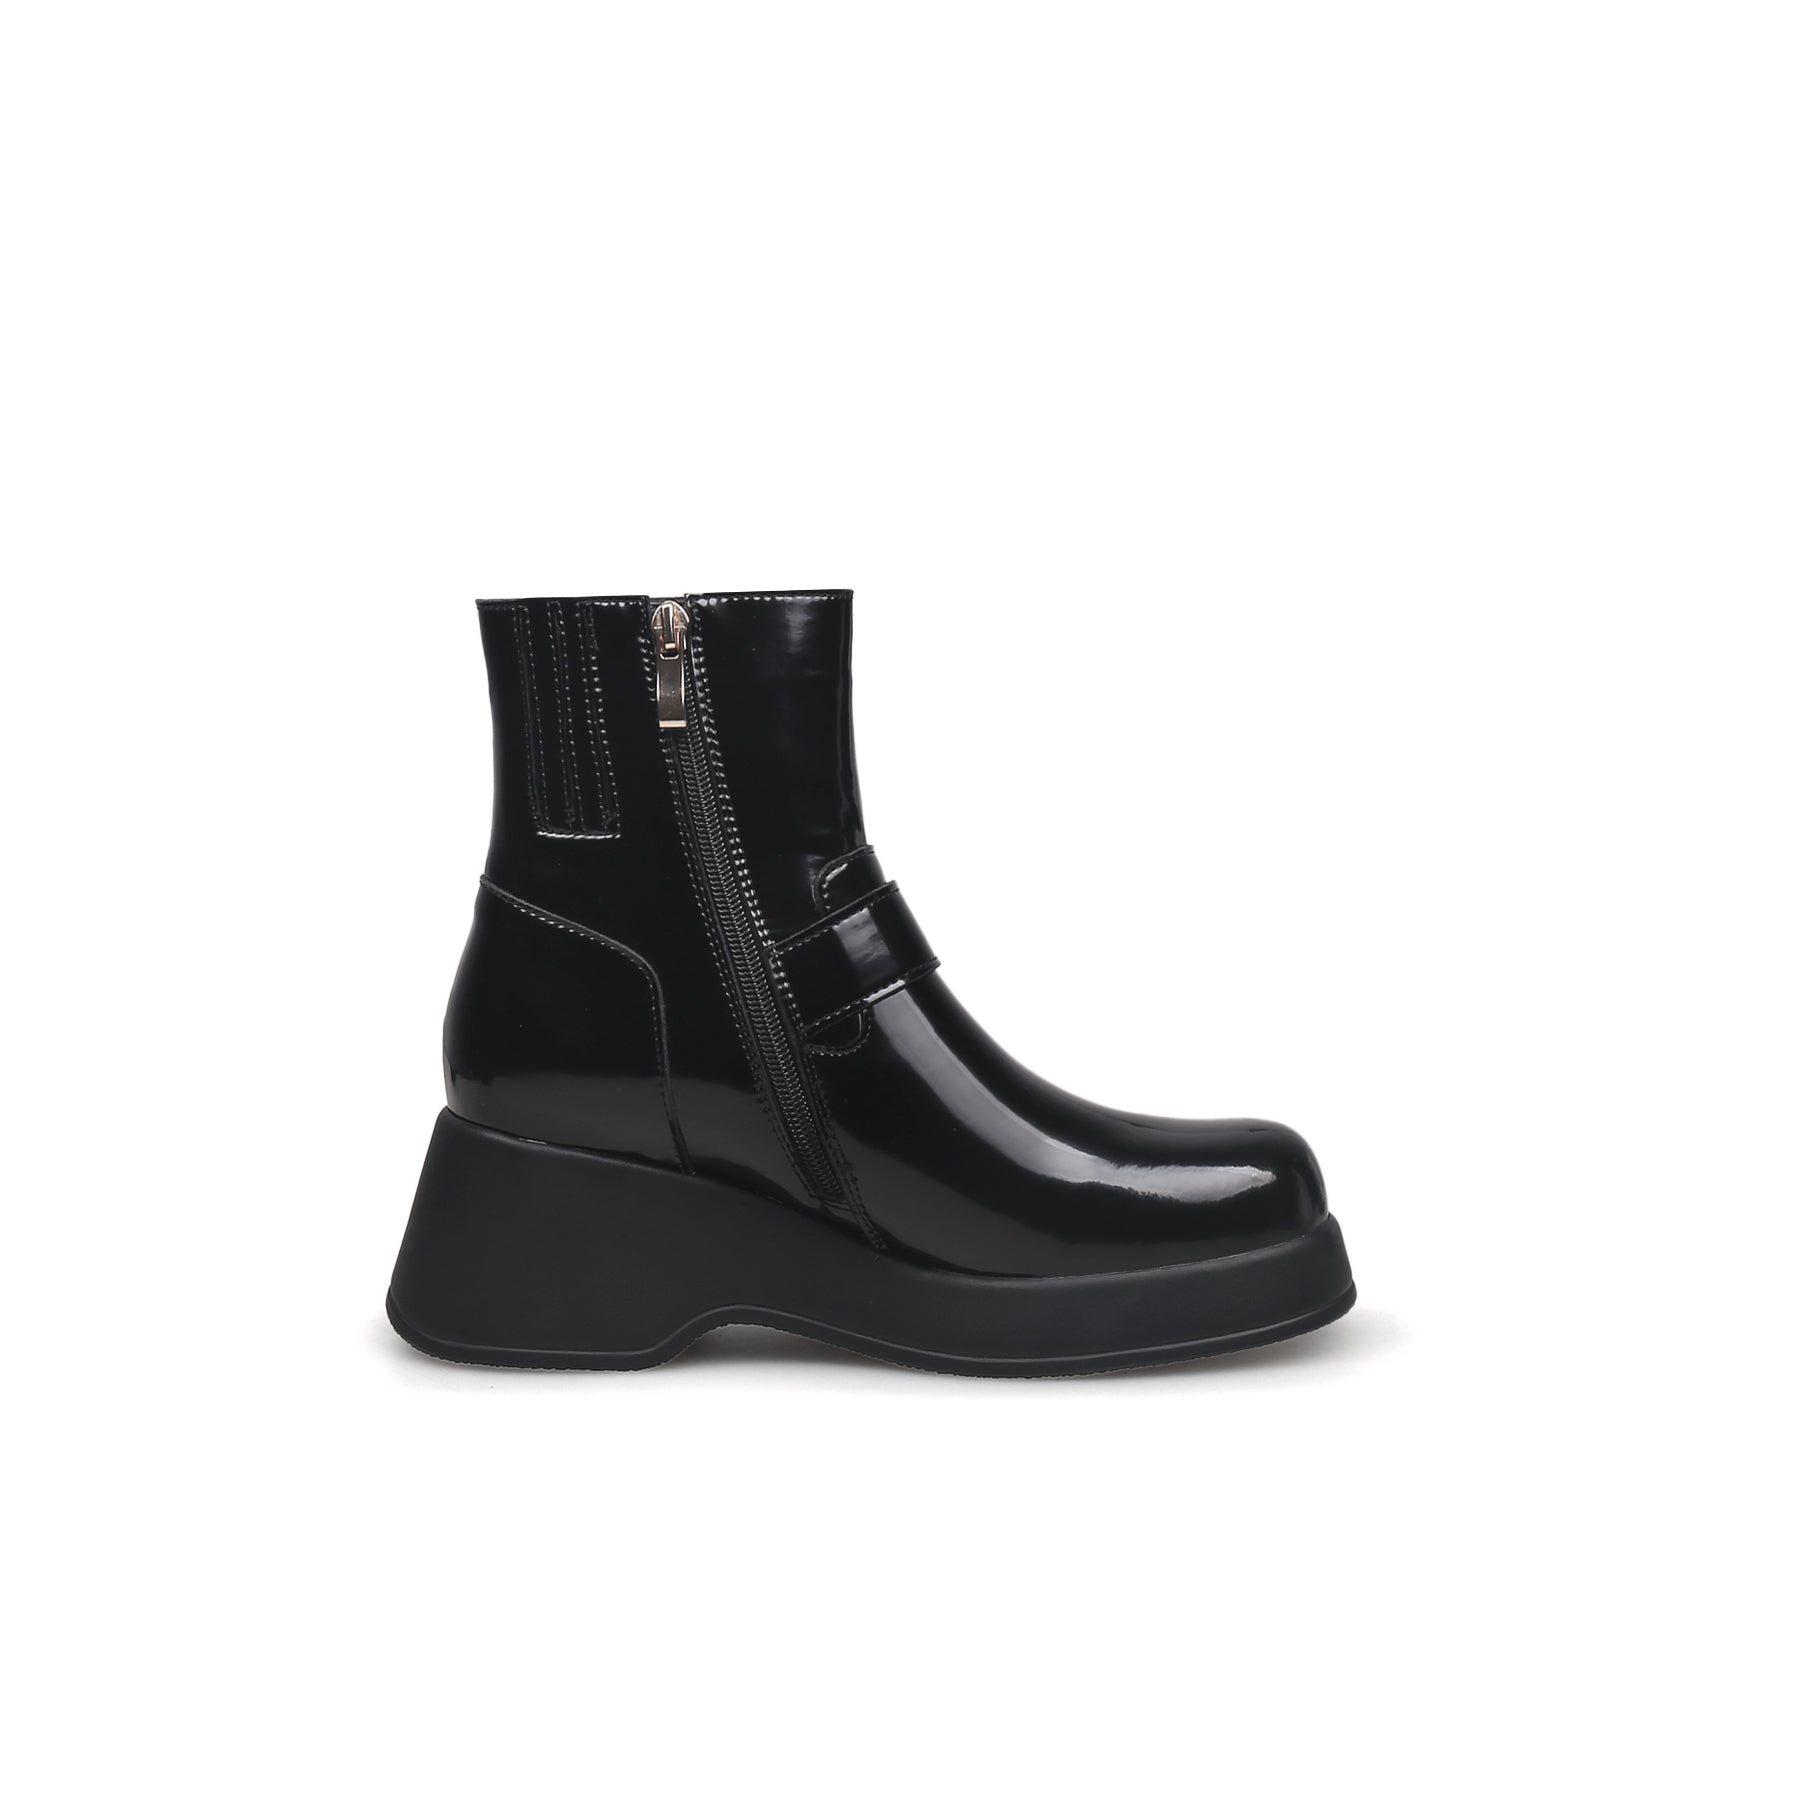 Buckled Walllie Patent Black Boots - 0cm